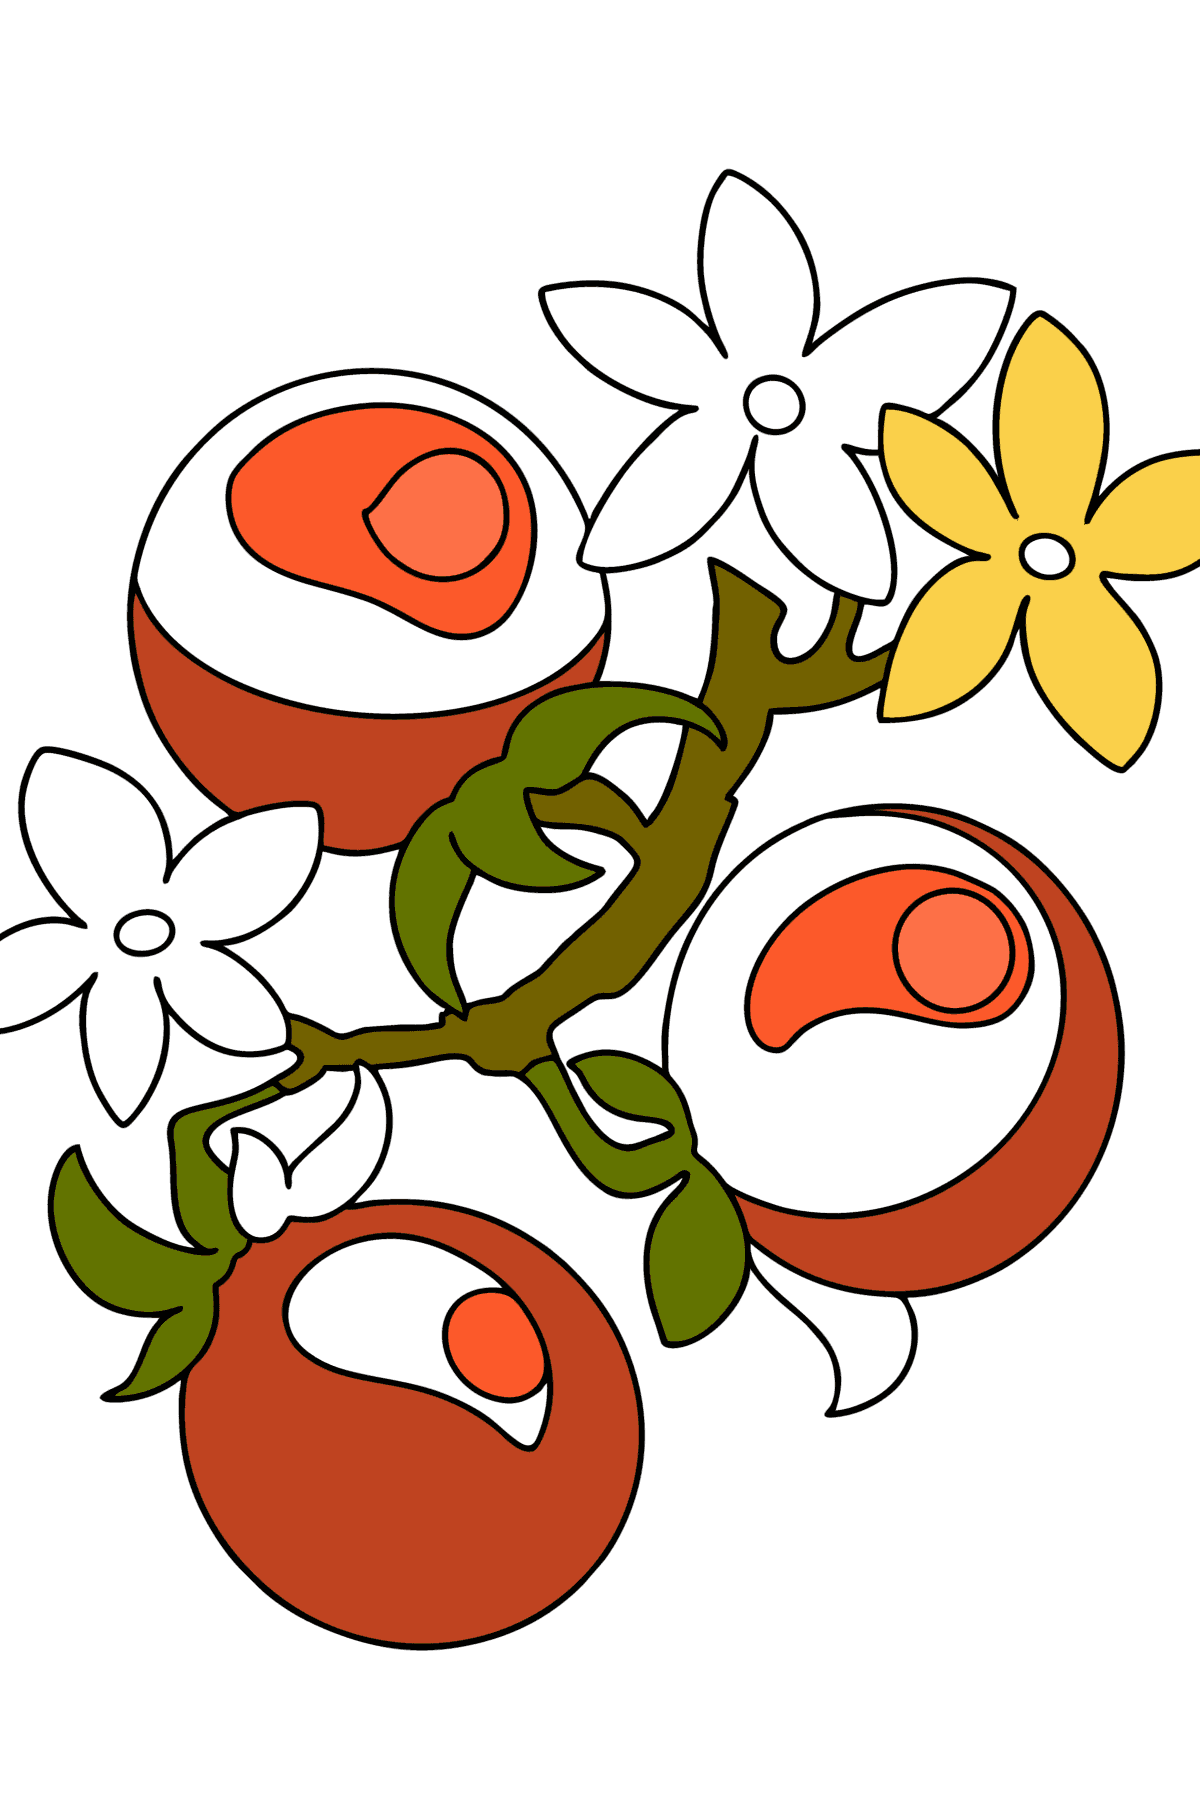 Tomatoes on the Branch сoloring page - Coloring Pages for Kids